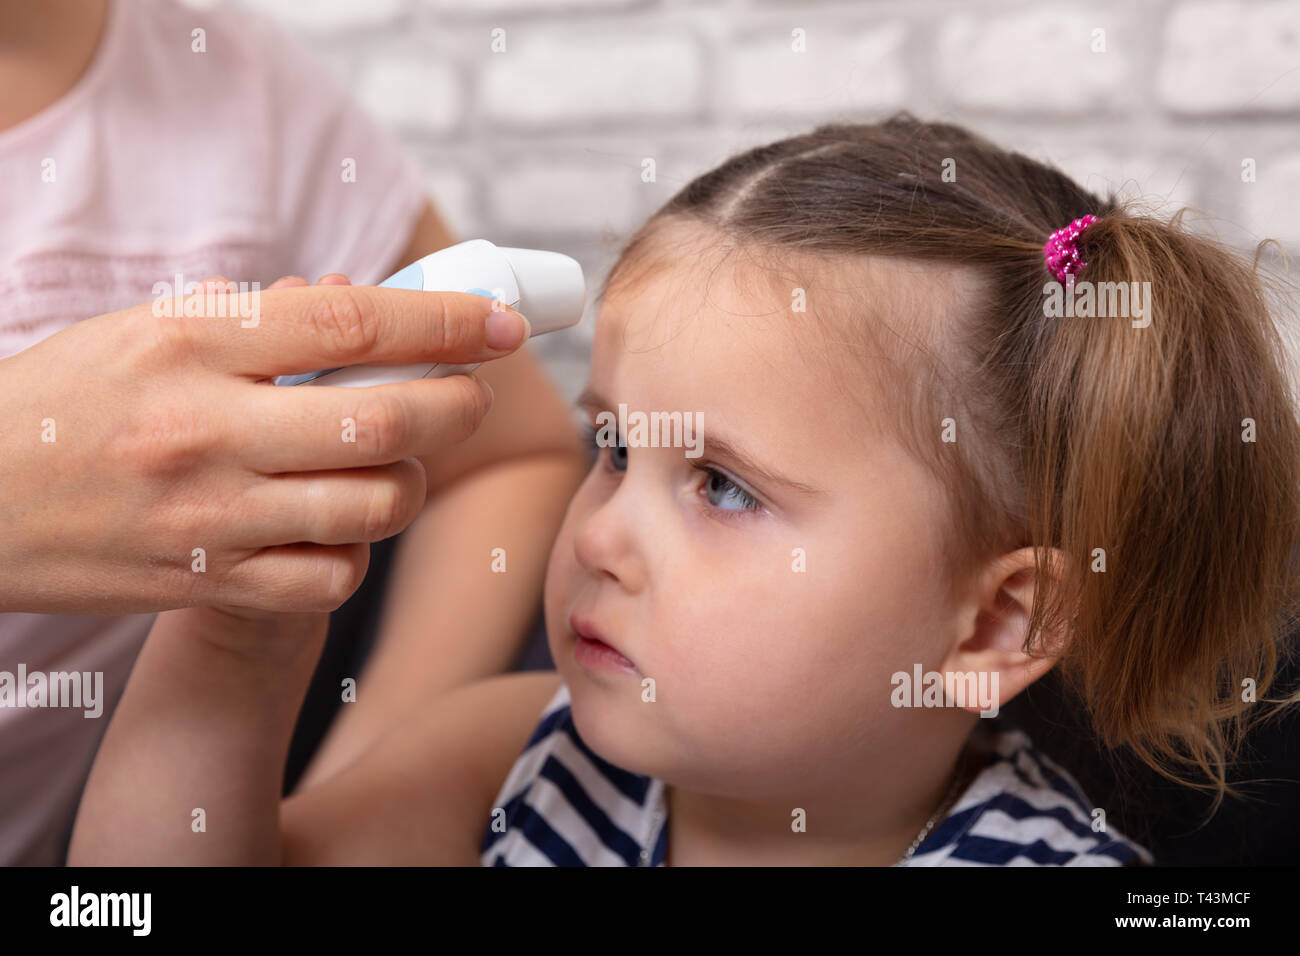 Mother Checking Fever Of Her Sick Daughter Using Forehead Thermometer At Home Stock Photo